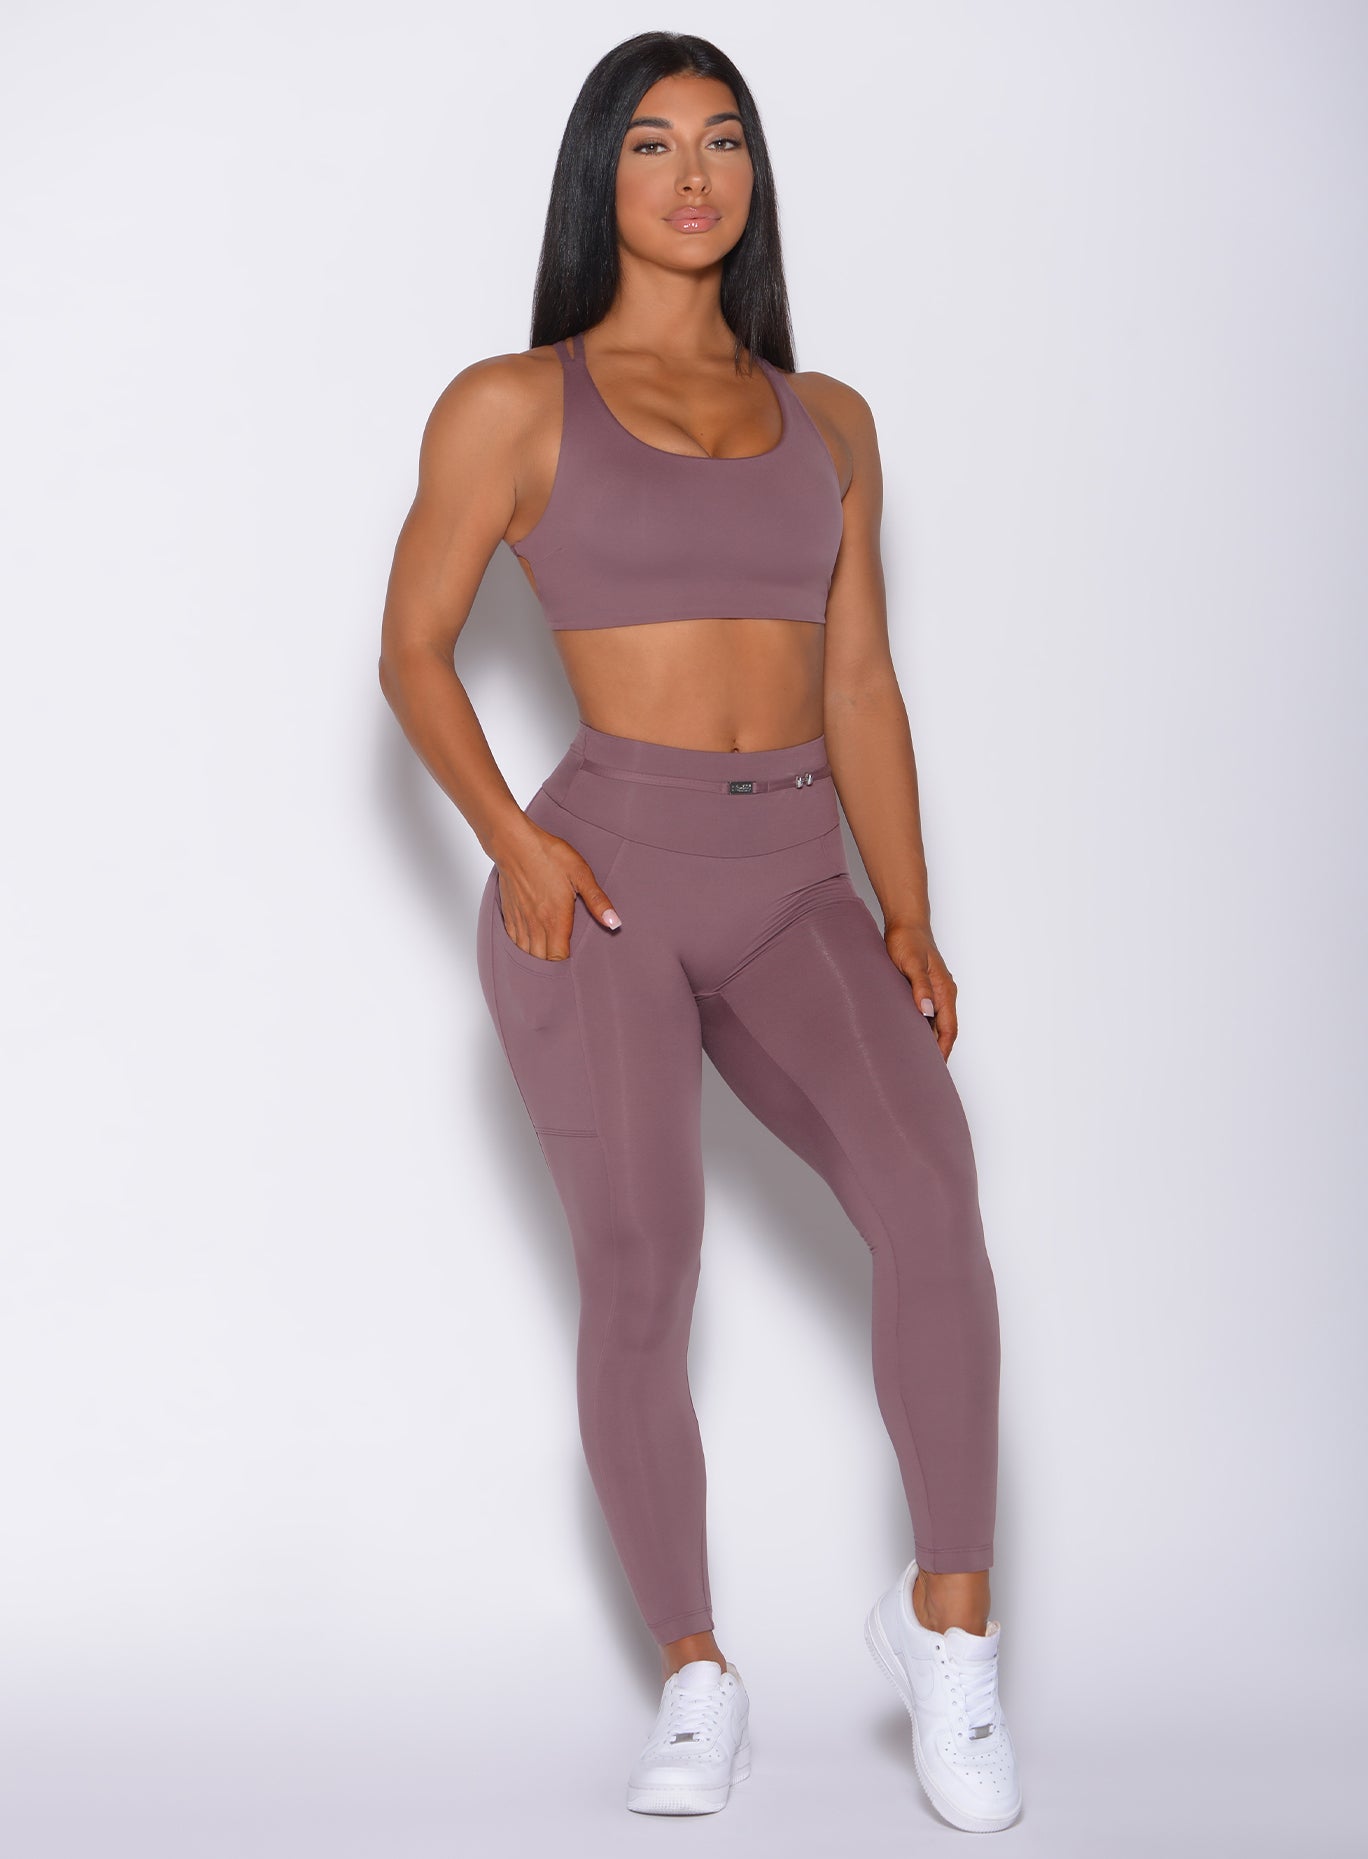 Front profile view of a model  with her left hand in pocket wearing our barbell legging in mauve color and a matching bra